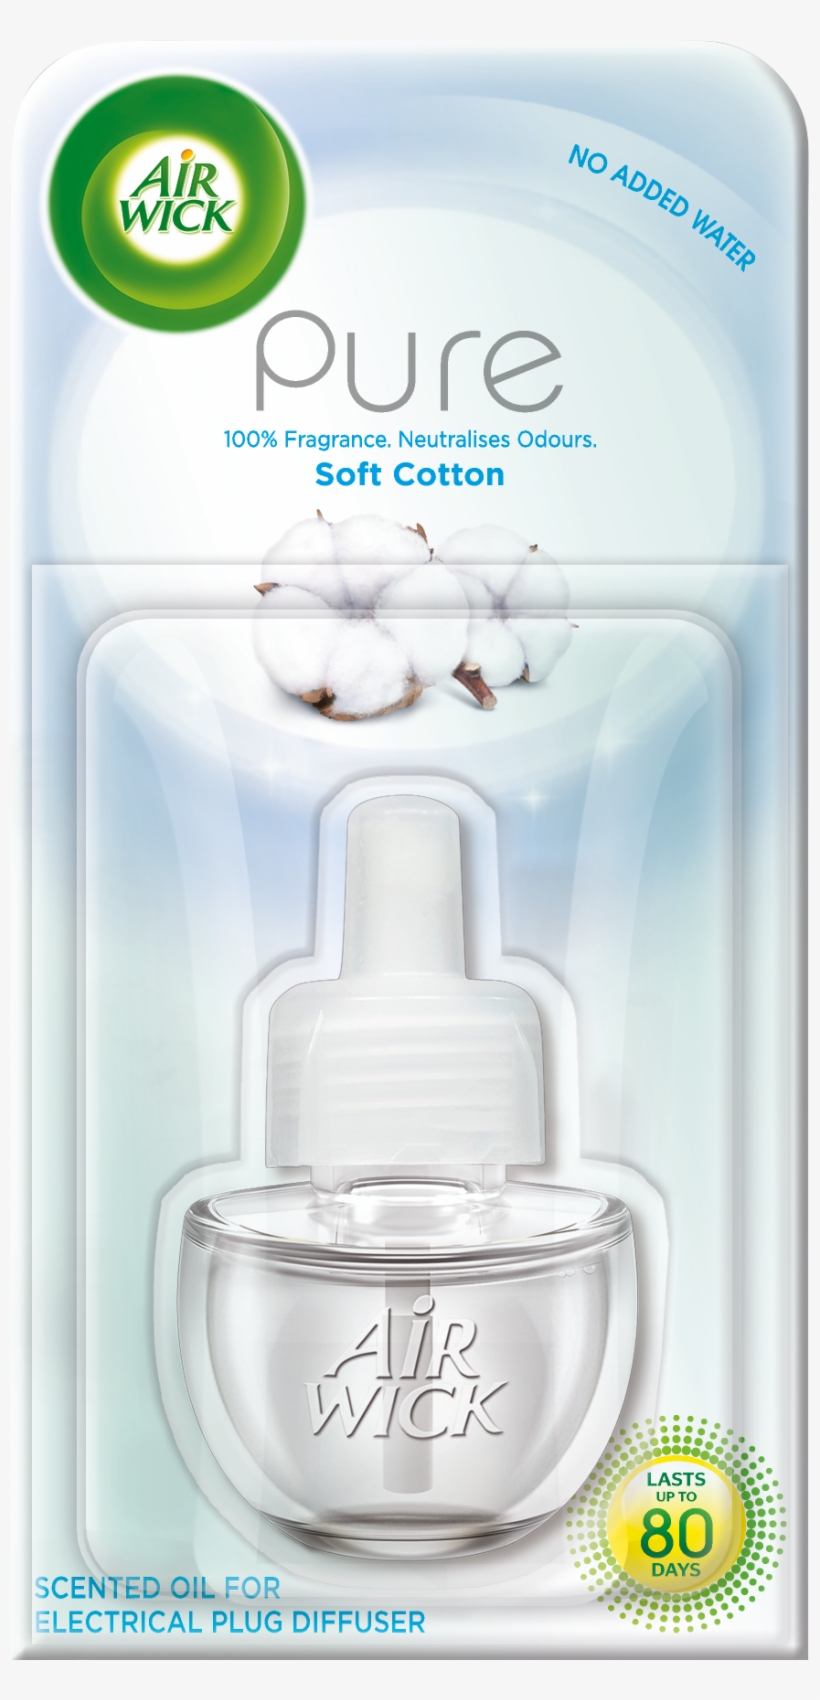 Air Wick Plug-in Refill Soft Cotton - Air Wick Scented Oil Refill, Warming - Apple Cinnamon, transparent png #6493597